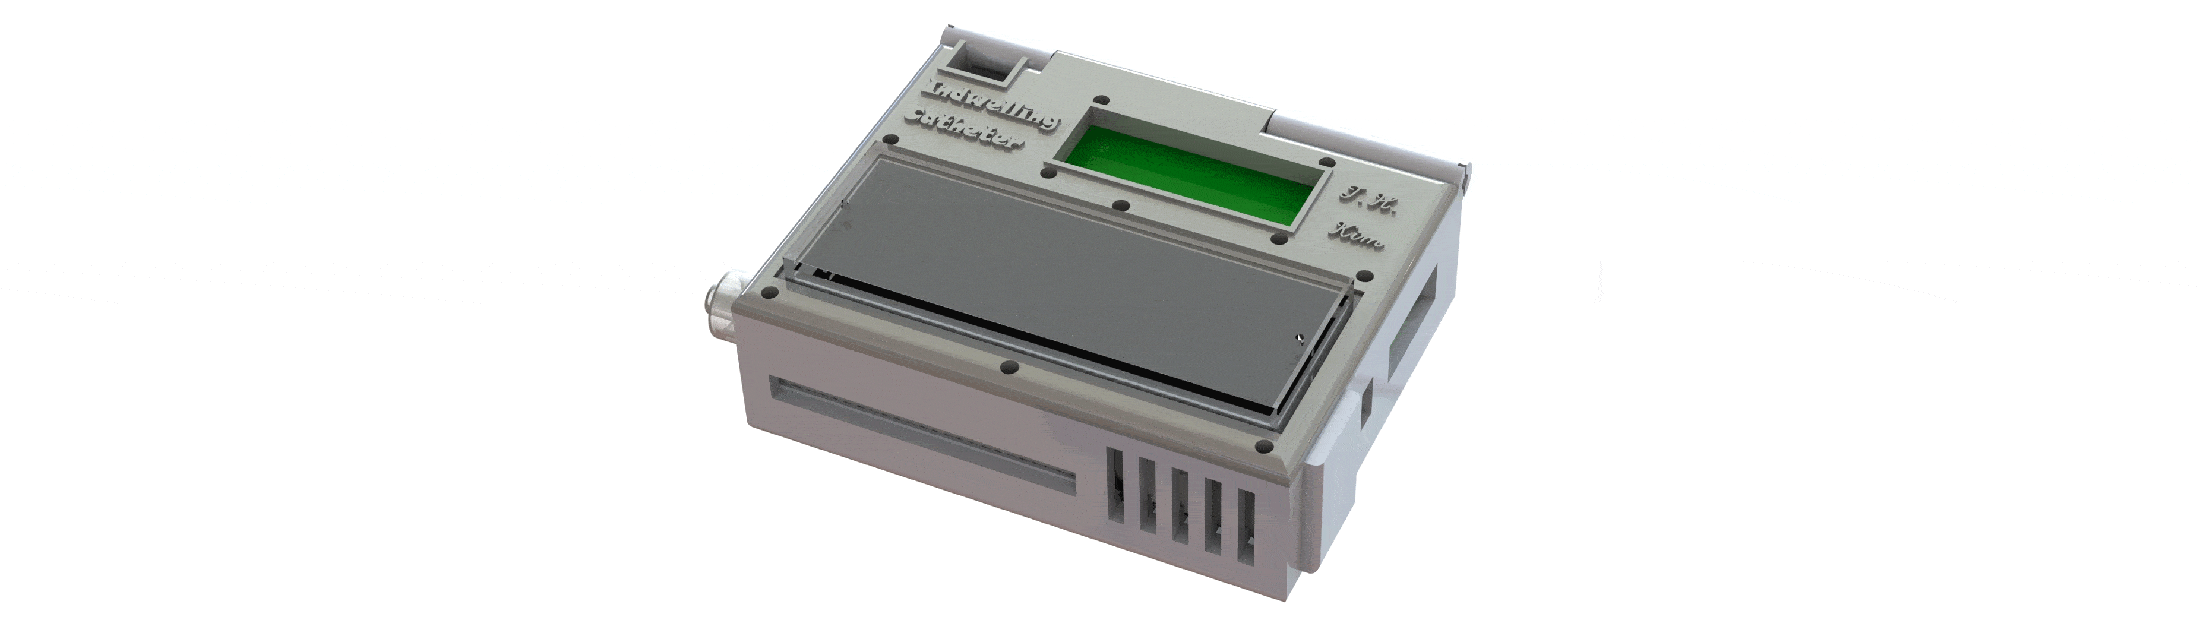 A device in the shape of a gray box.